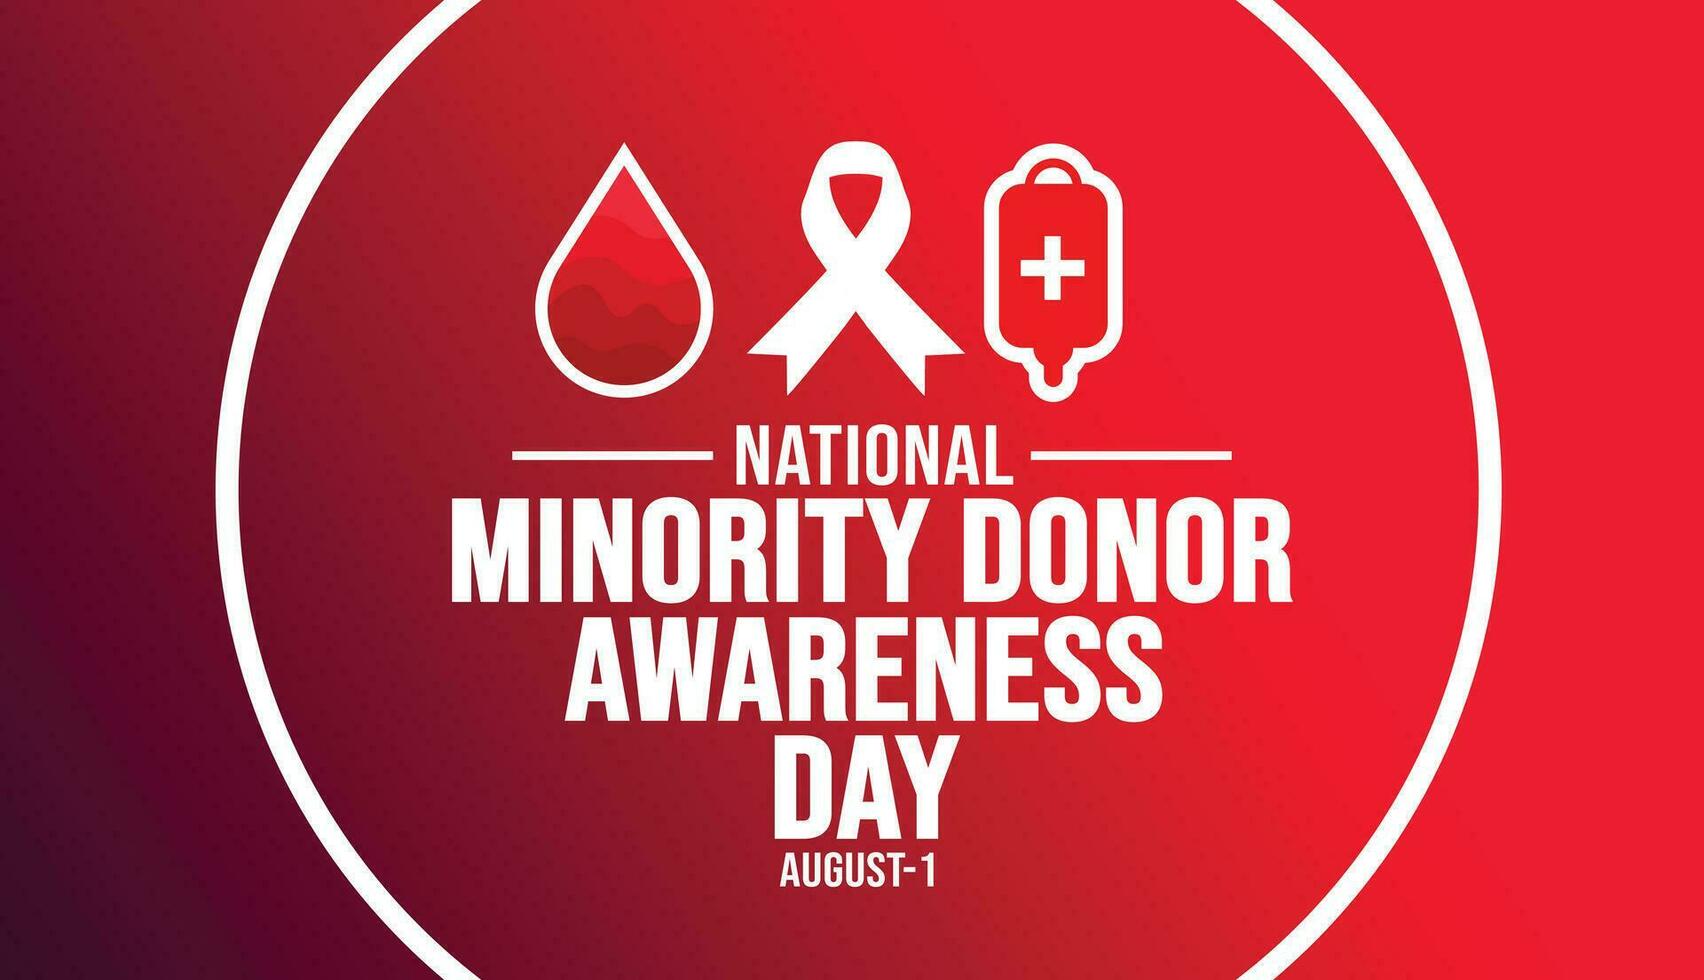 National Minority Donor Awareness Day background template. Holiday concept. background, banner, placard, card, and poster design template with text inscription and standard color. vector illustration.